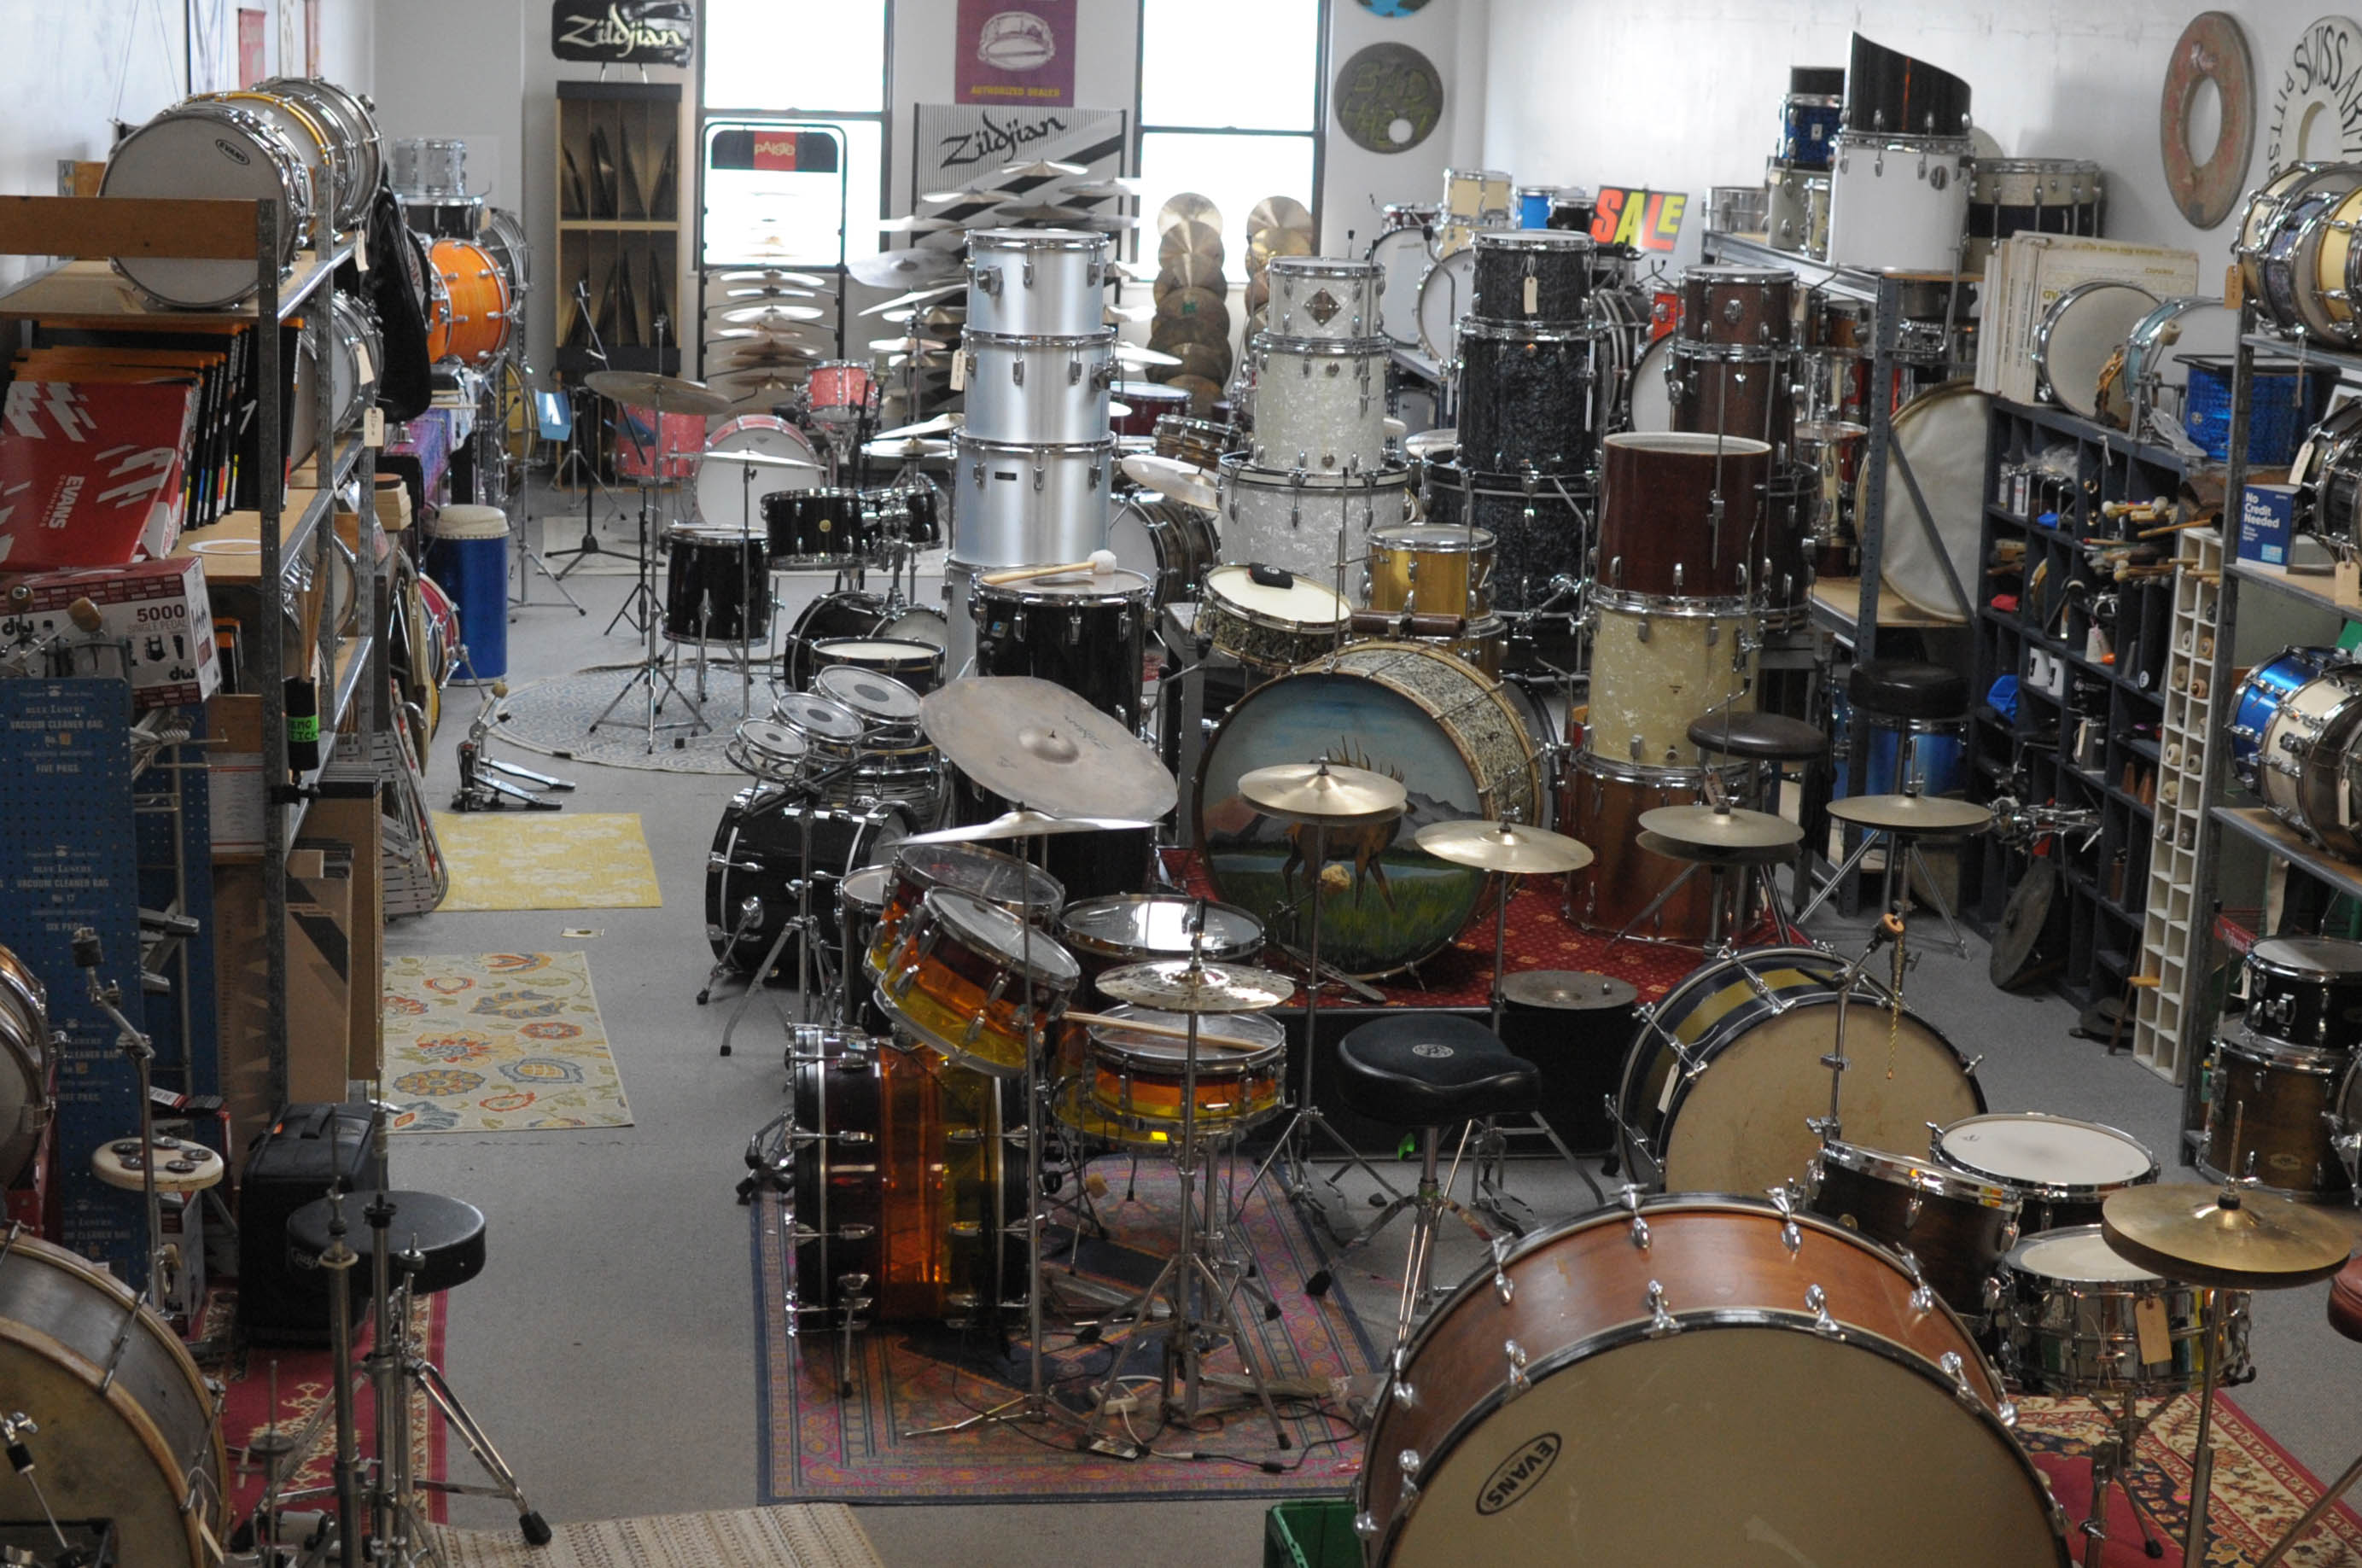 Drum Shop of Alto Music Wappingers Falls